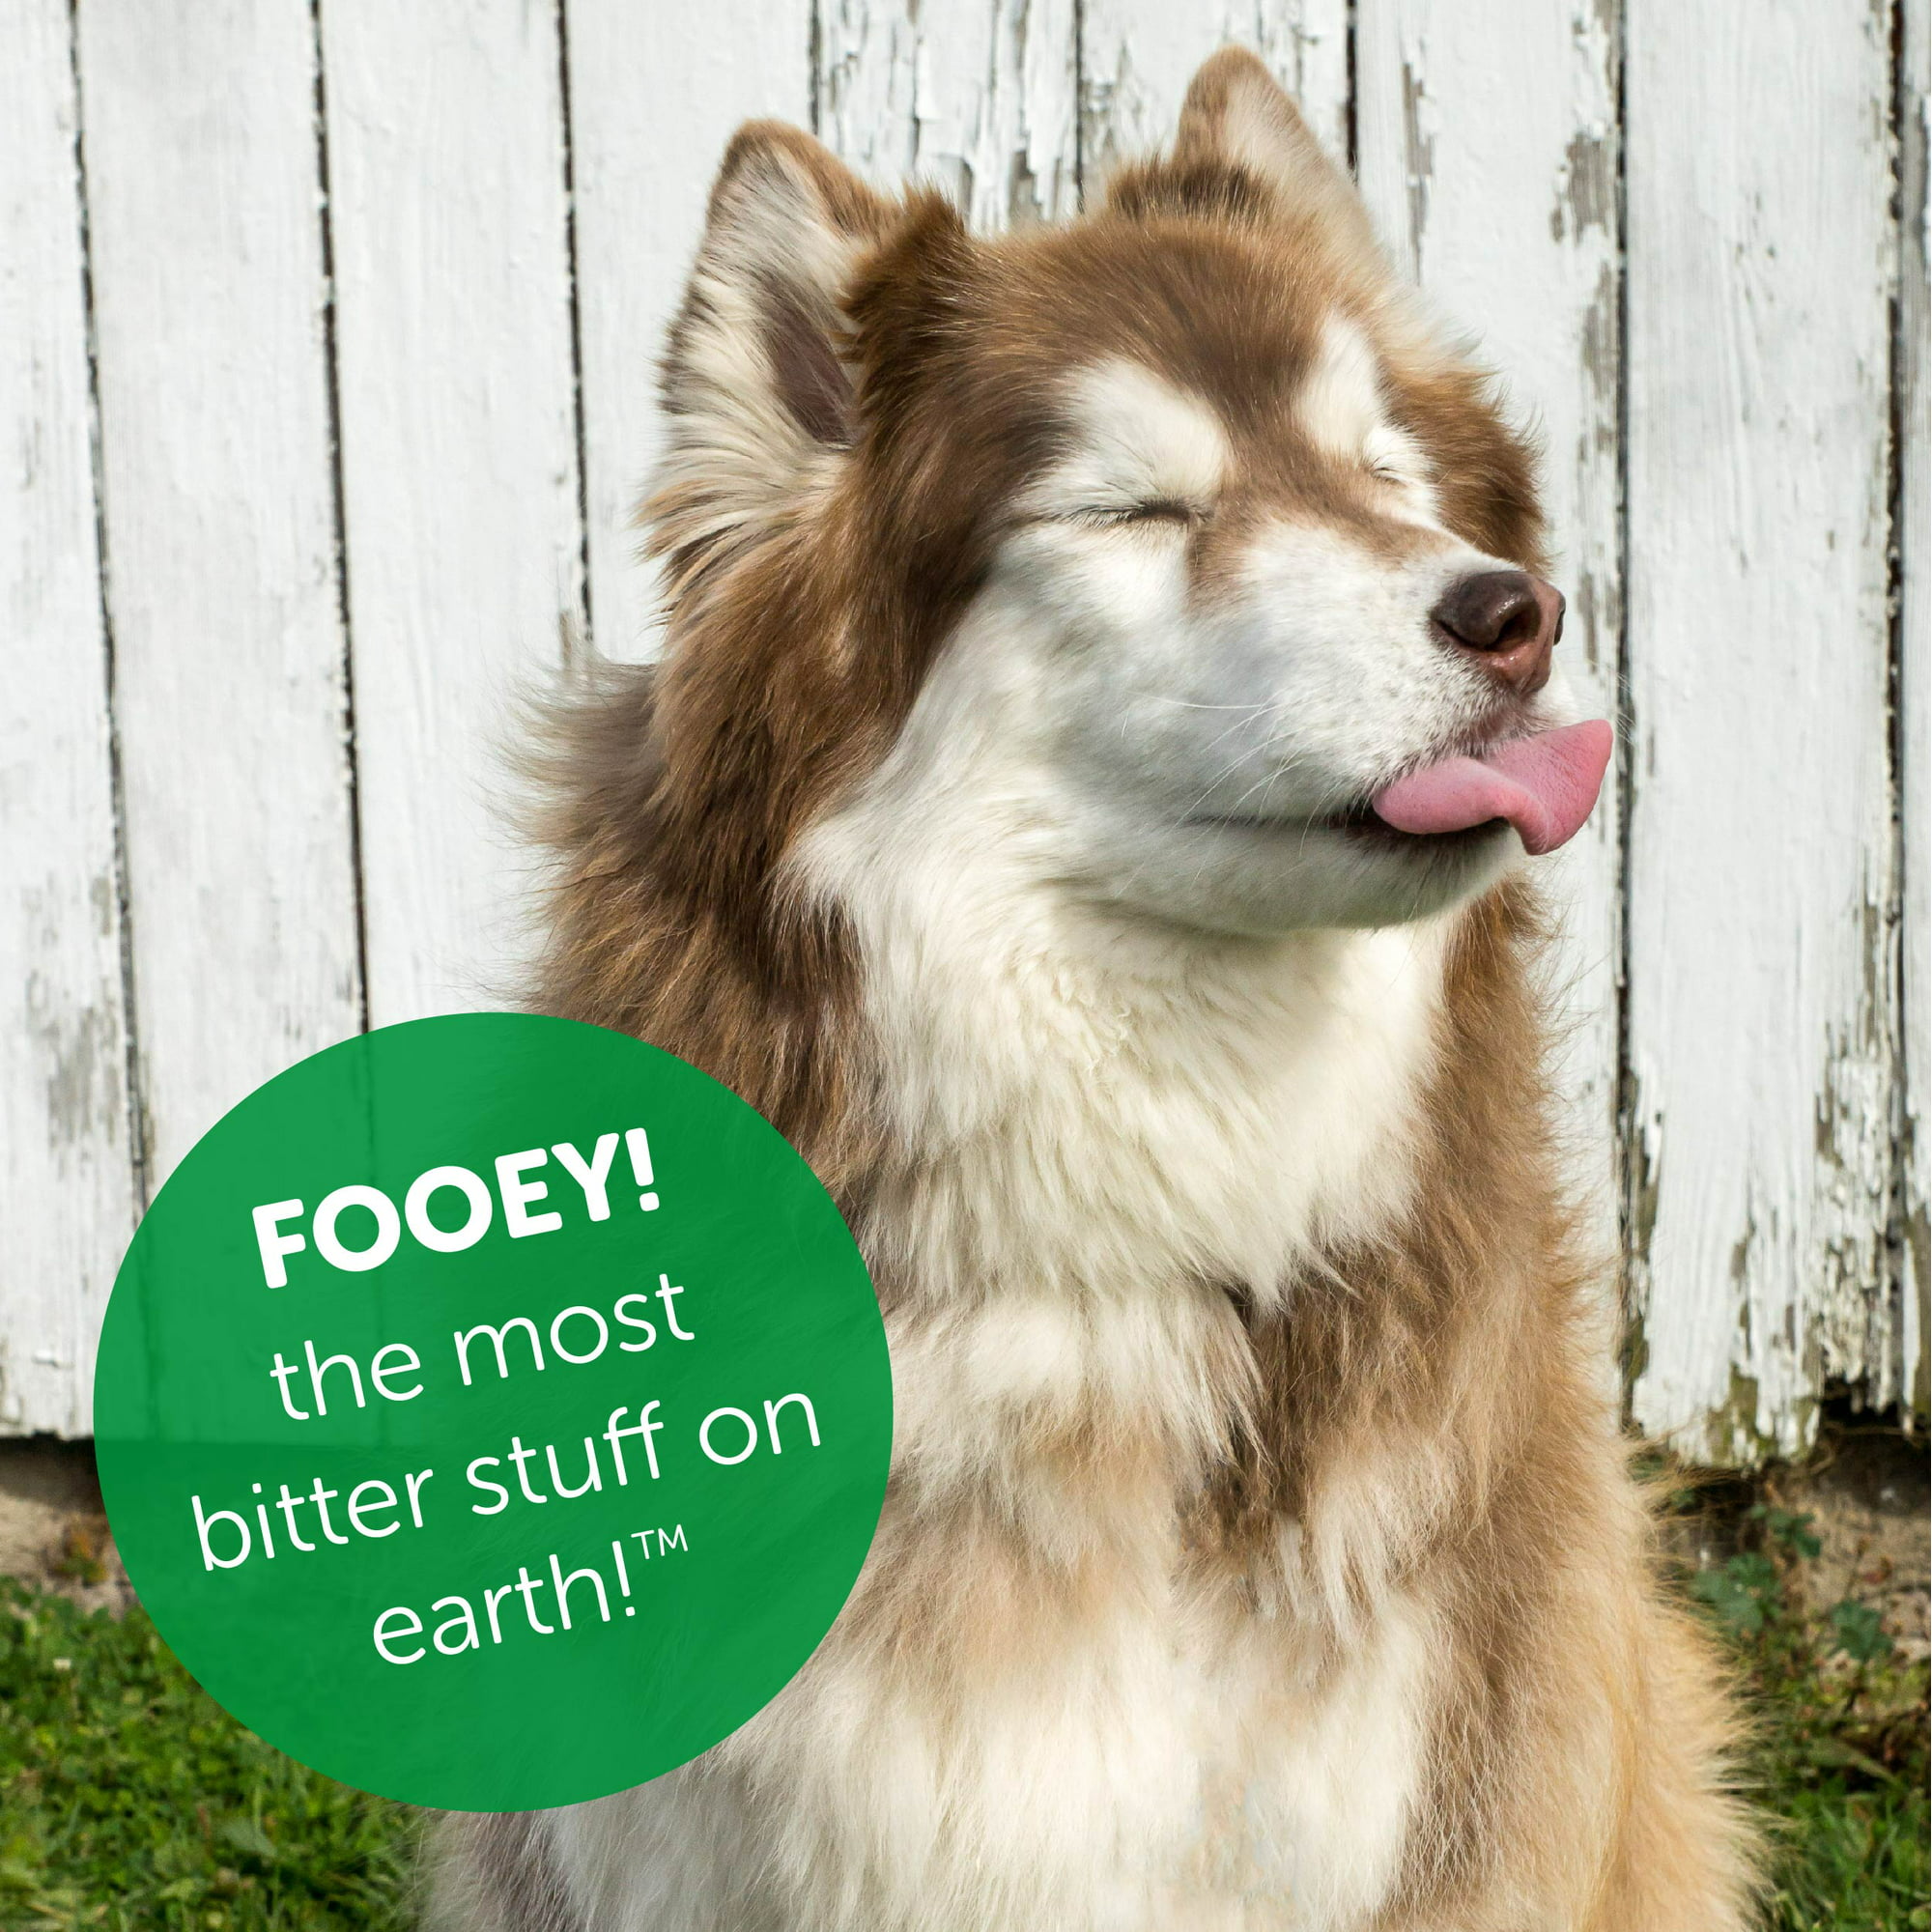 Fooey! Ultra-Bitter Training Aid Spray – Chewing, Biting, Licking Deterrent for Pets, 8 oz.